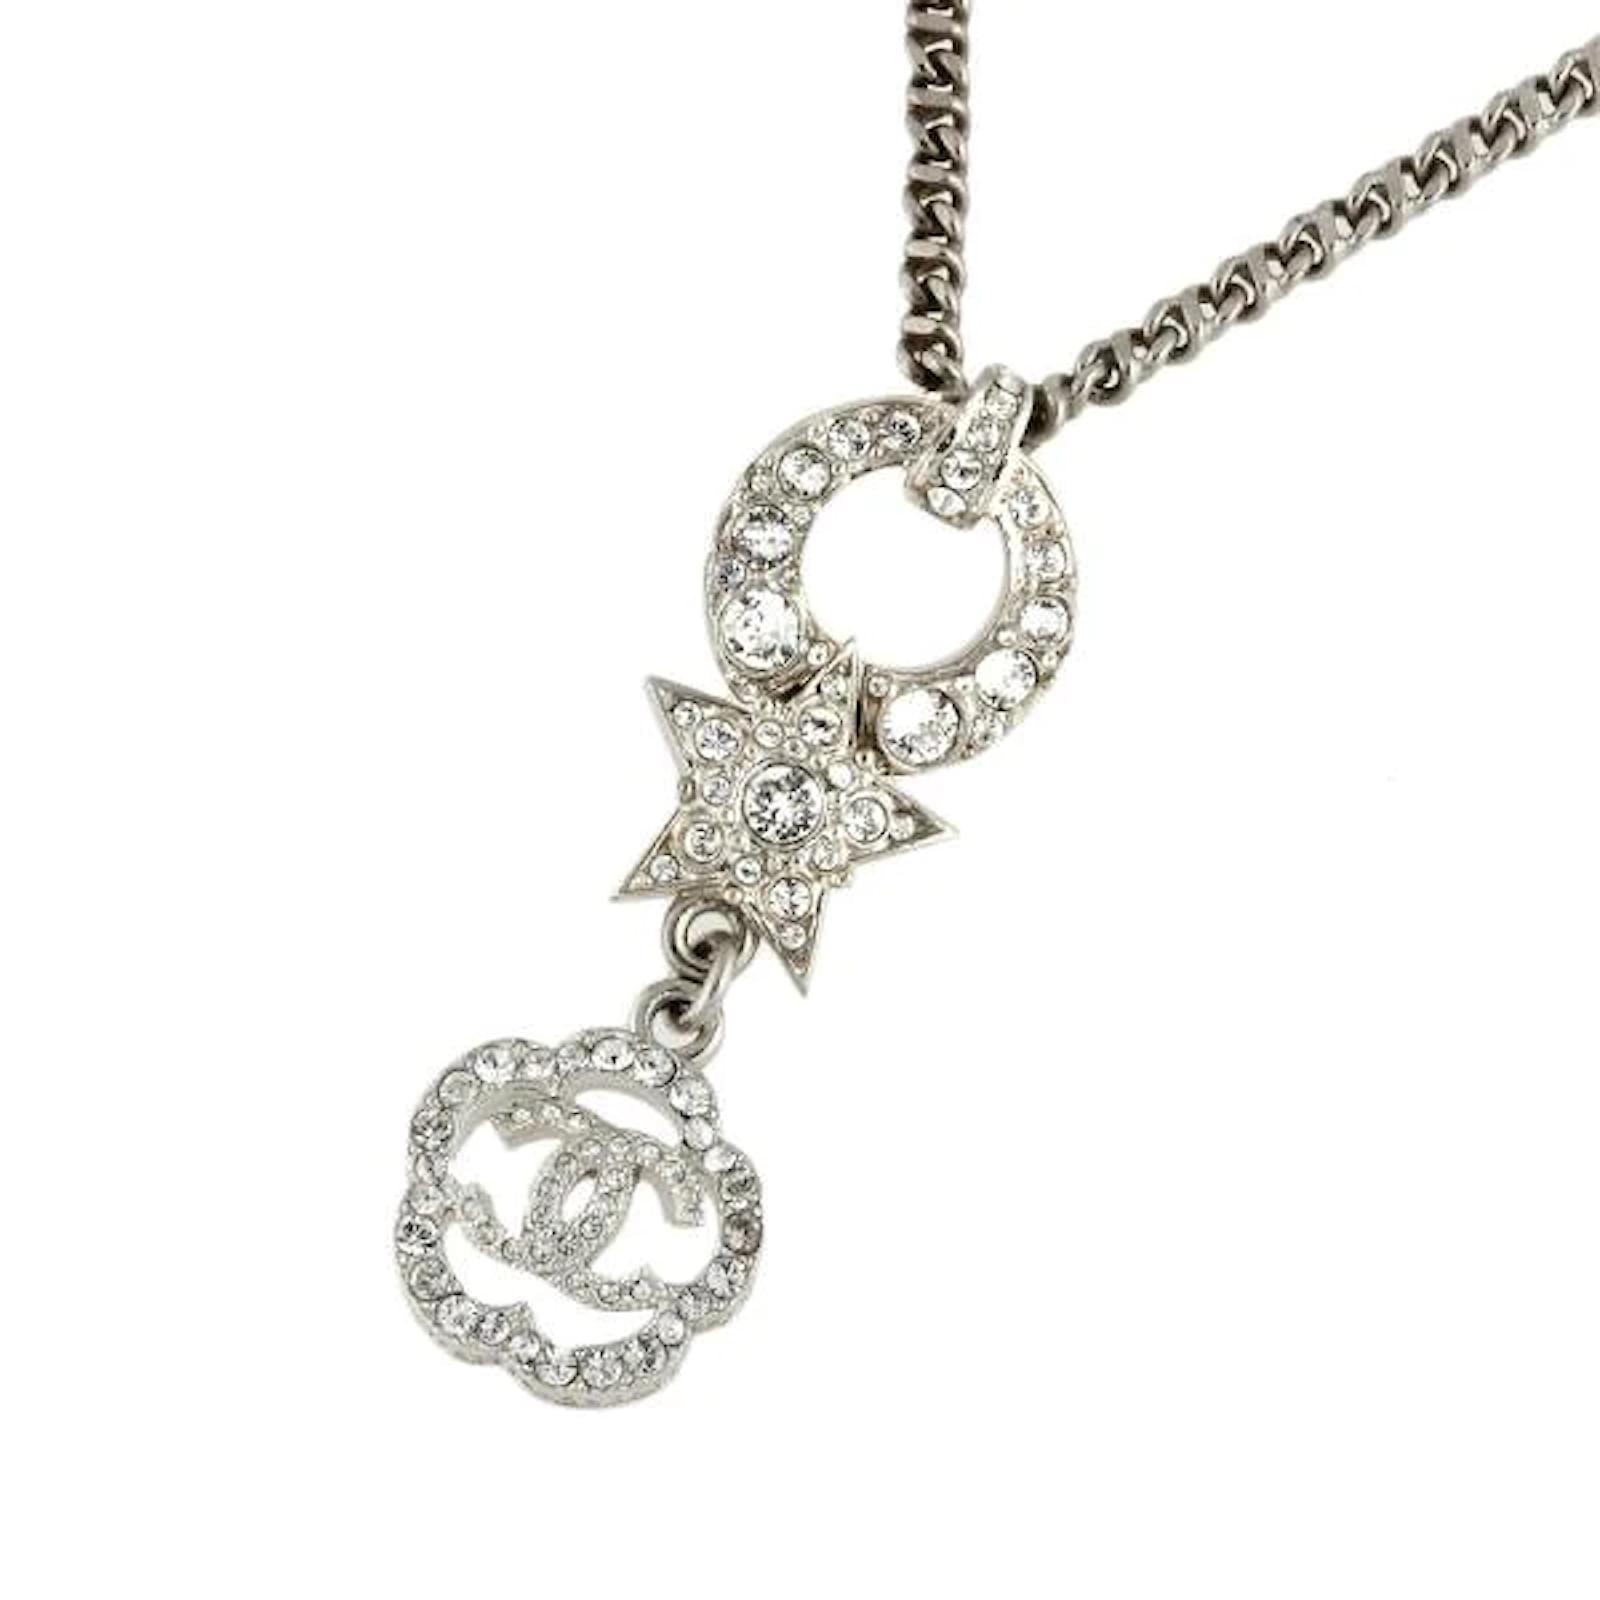 Exquisite Geometric Crystal Star Necklace Korean Fashion Choker For Womens  Anniversary And Wedding Choker Necklace From Joanna_jewelry, $3.51 |  DHgate.Com